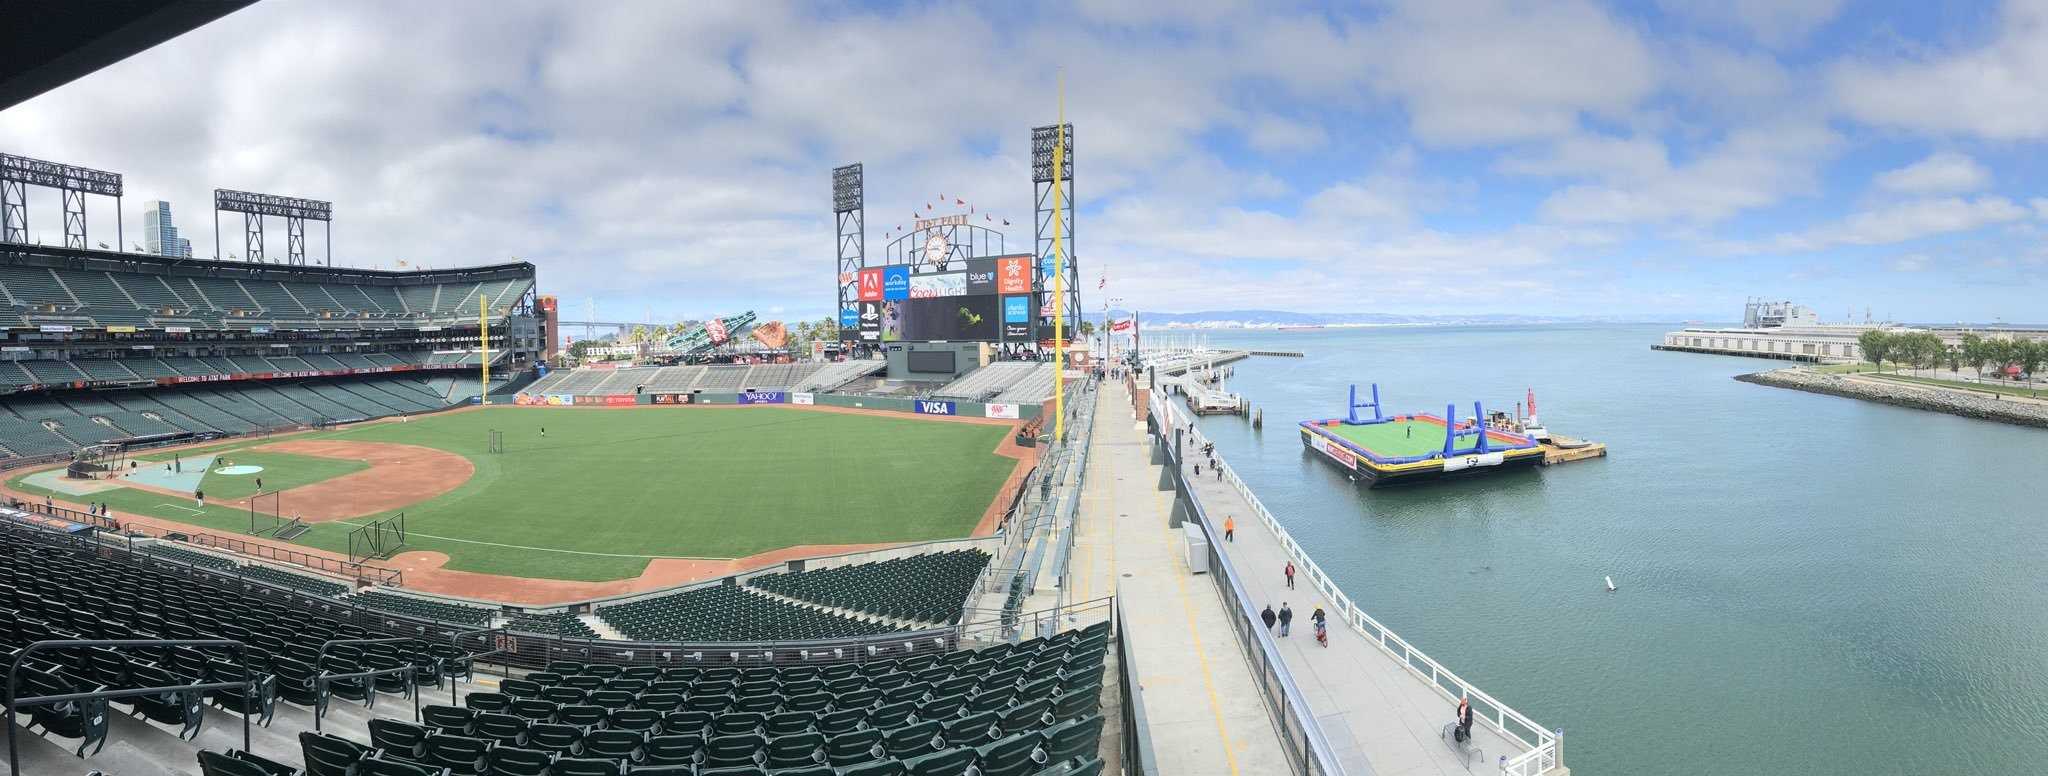 AT&T Park is the venue for the Rugby World Cup Sevens. Photo: AT&T Park